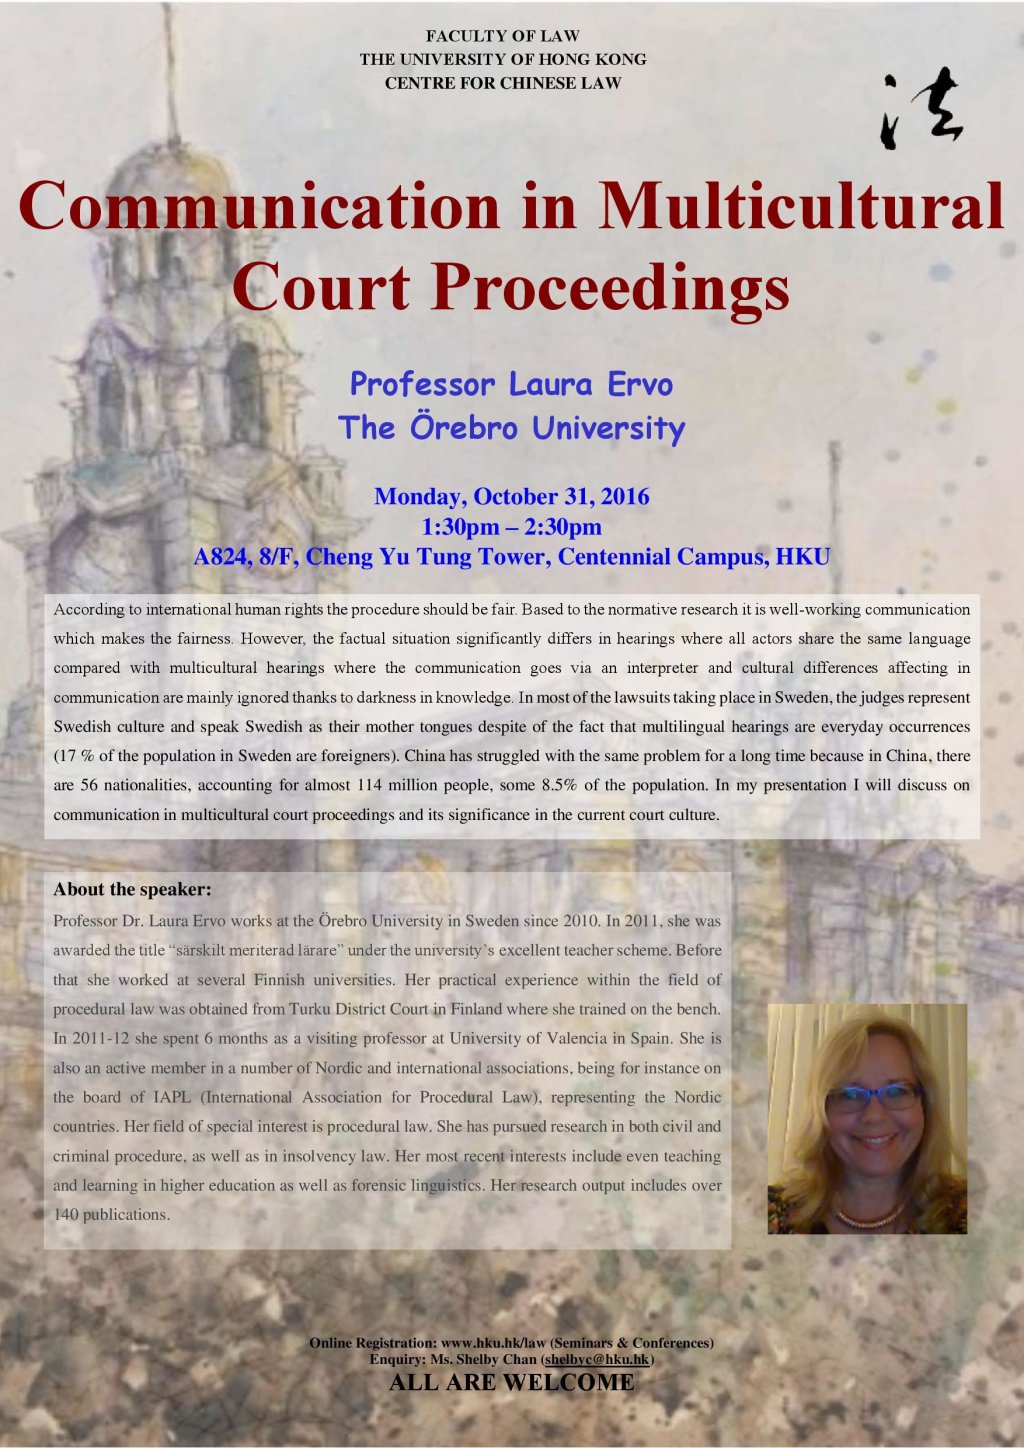 CCL Talk: Communication in Multicultural Court Proceedings